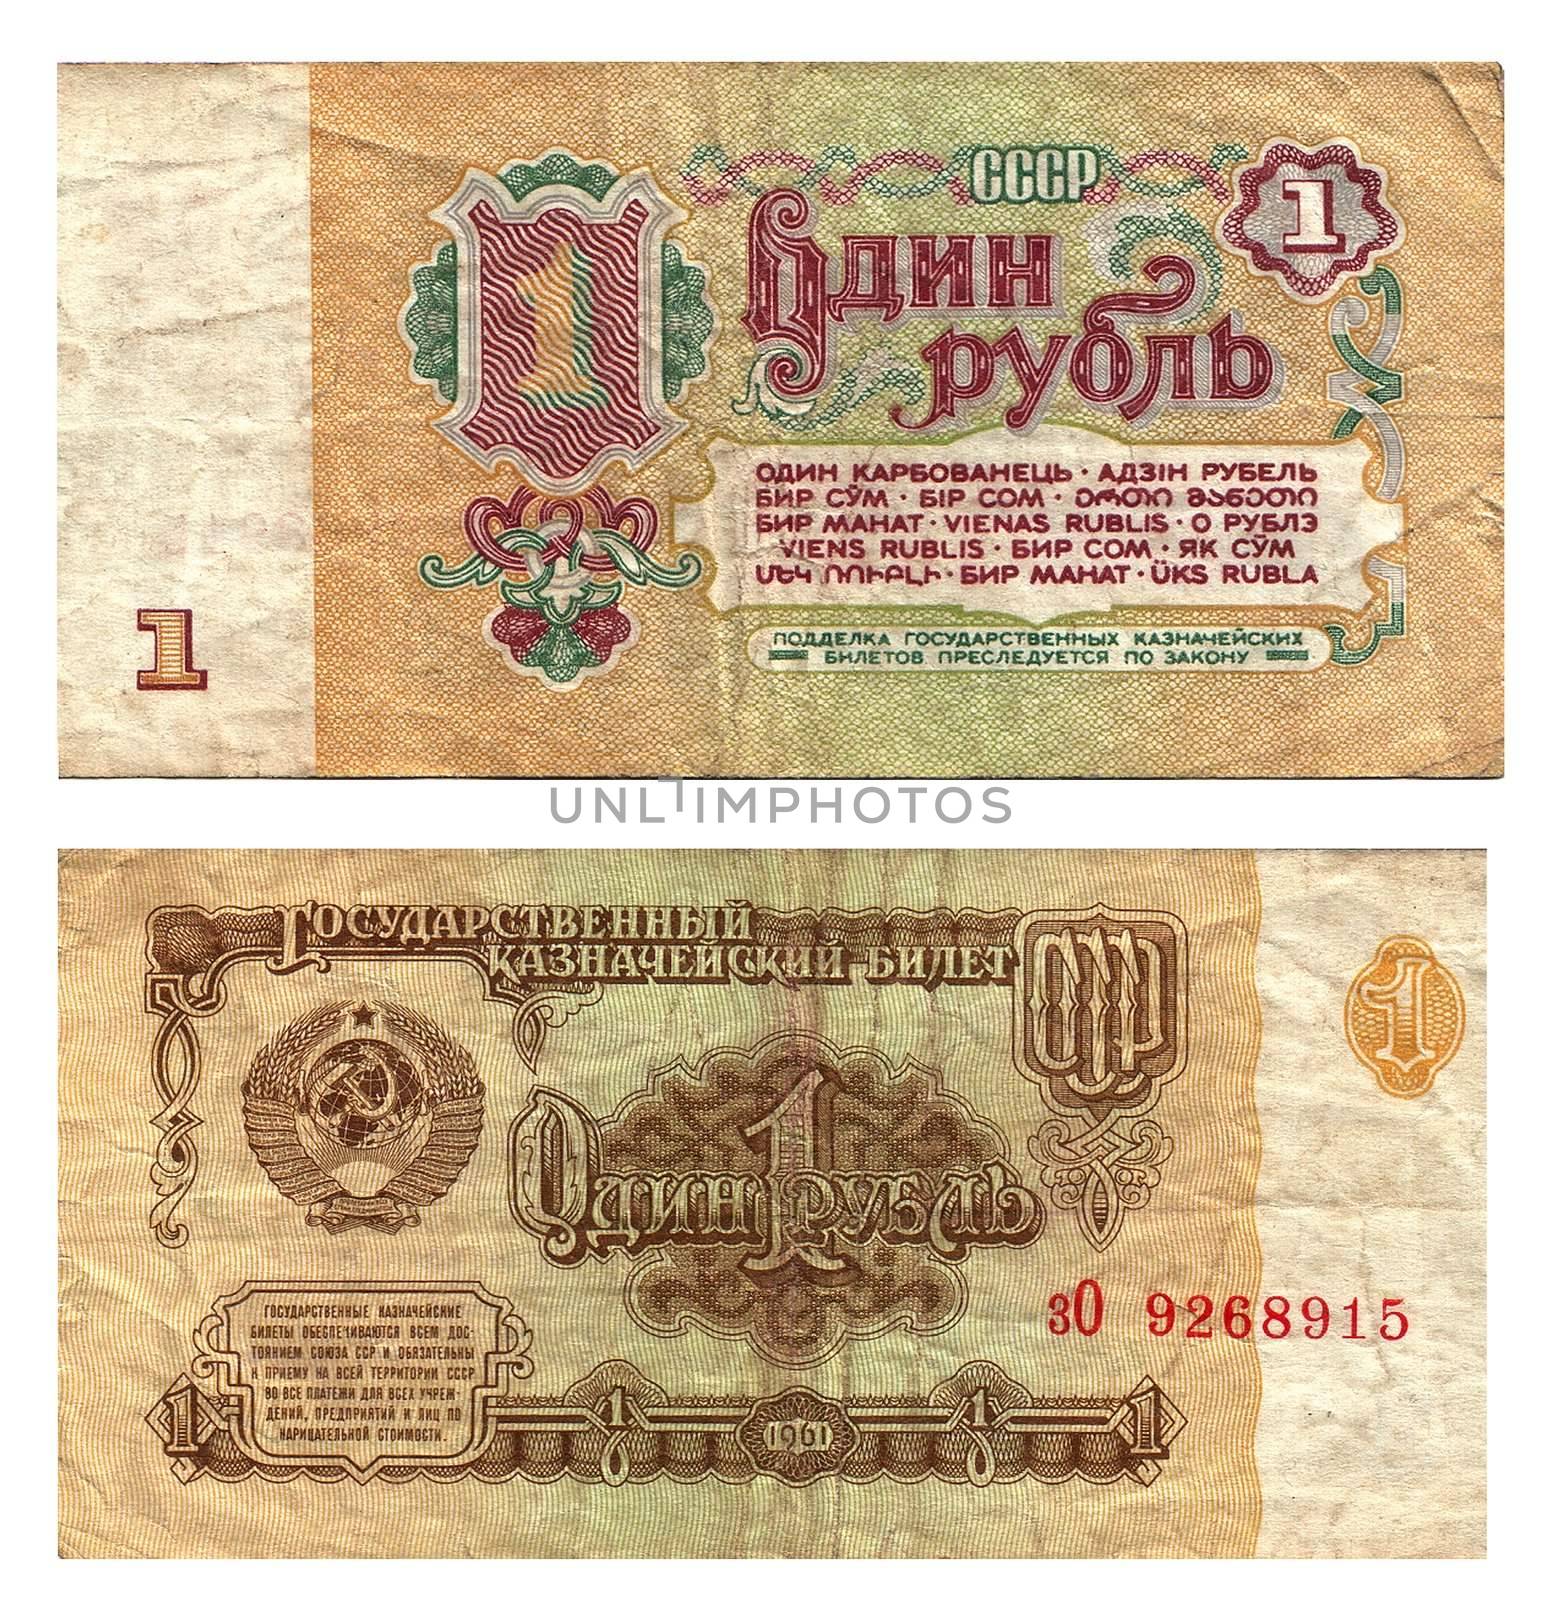 Paper money face value 1 rouble of old design

